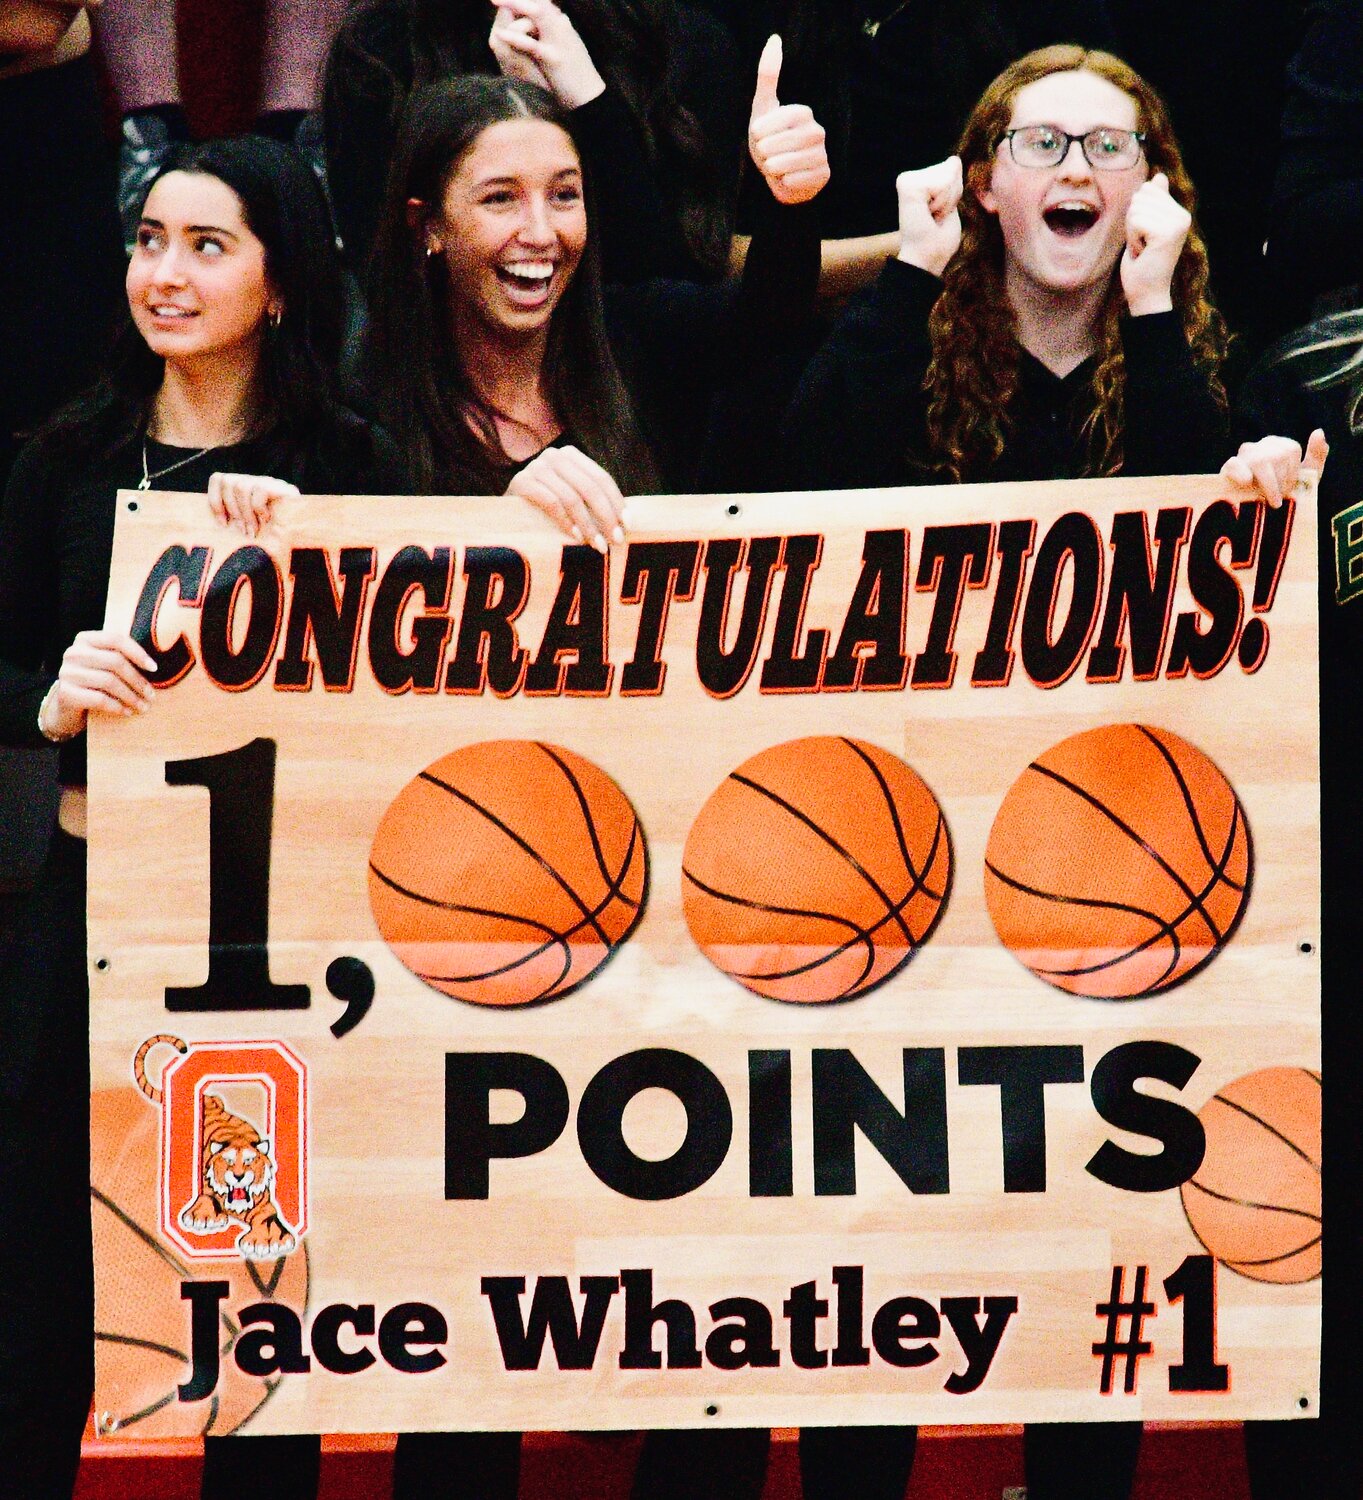 OZARK FANS celebrate Jace Whatley joining the Tigers' 1,000-point club.